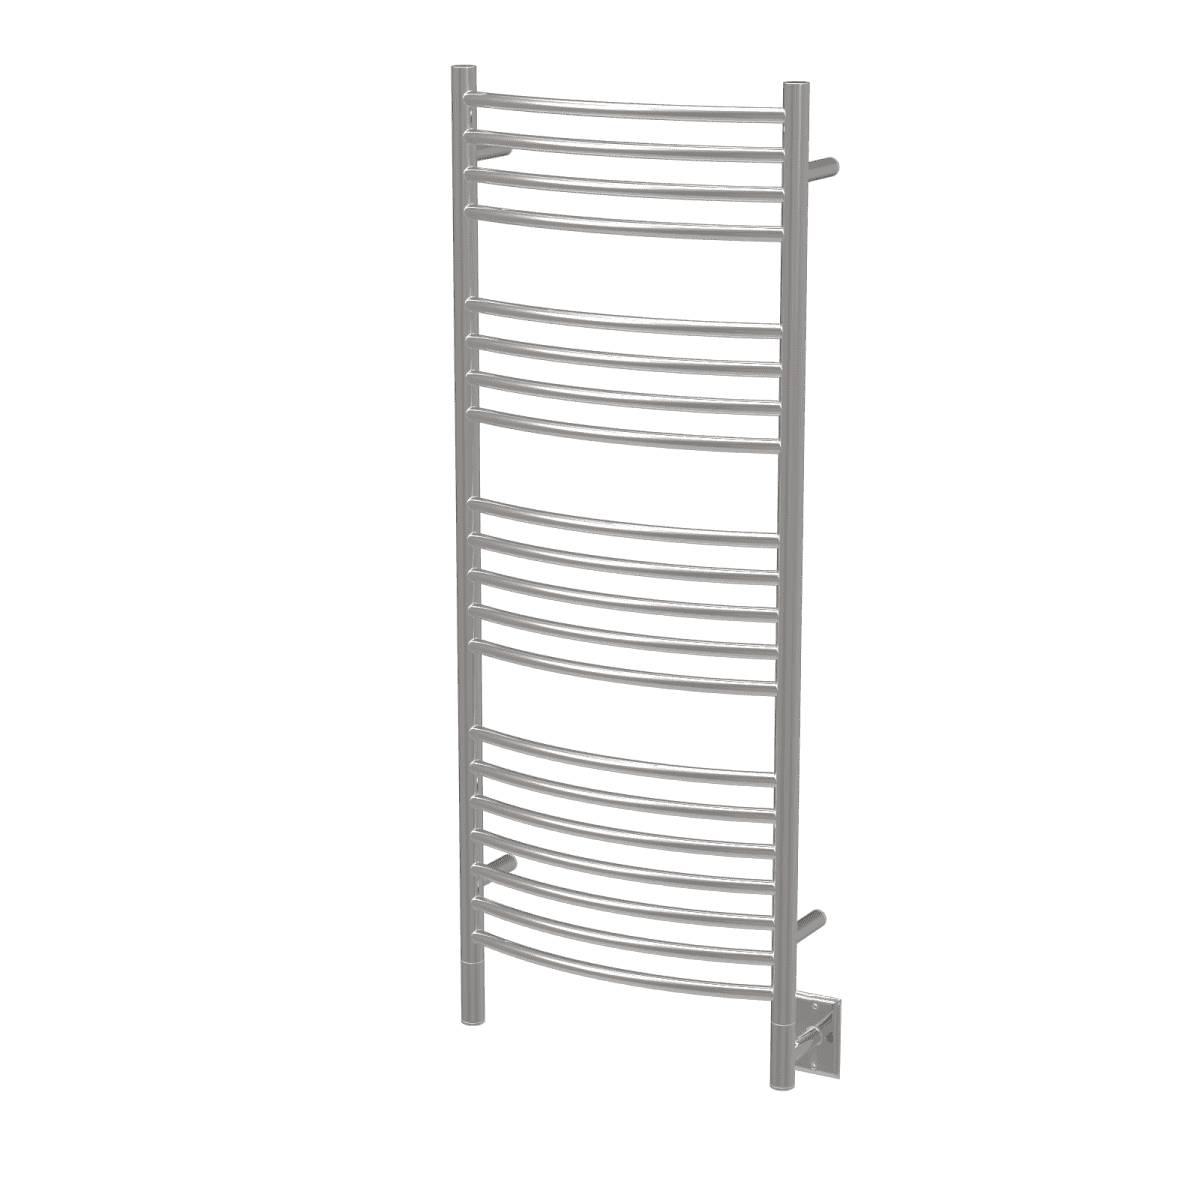 Amba DCP Model D Curved 20 Bar Hardwired Towel Warmer - Polished